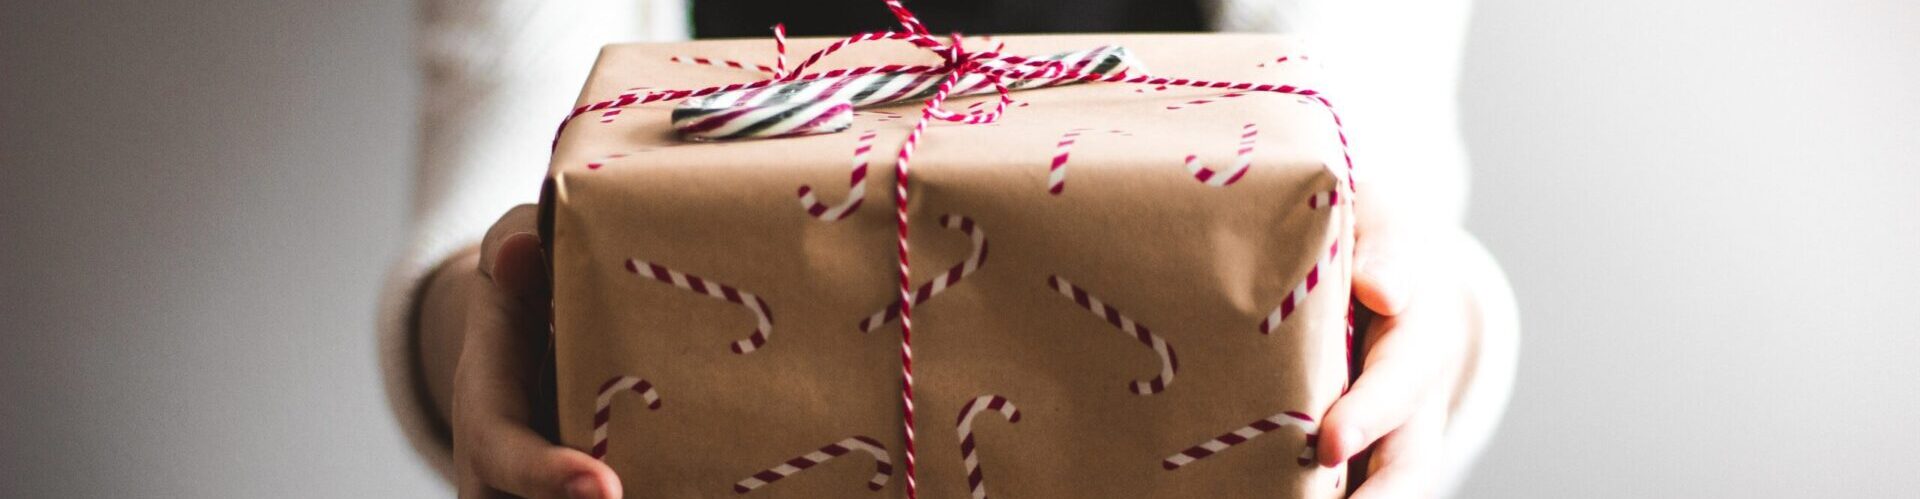 Woman holding present wrapped in candy cane wrapping paper.